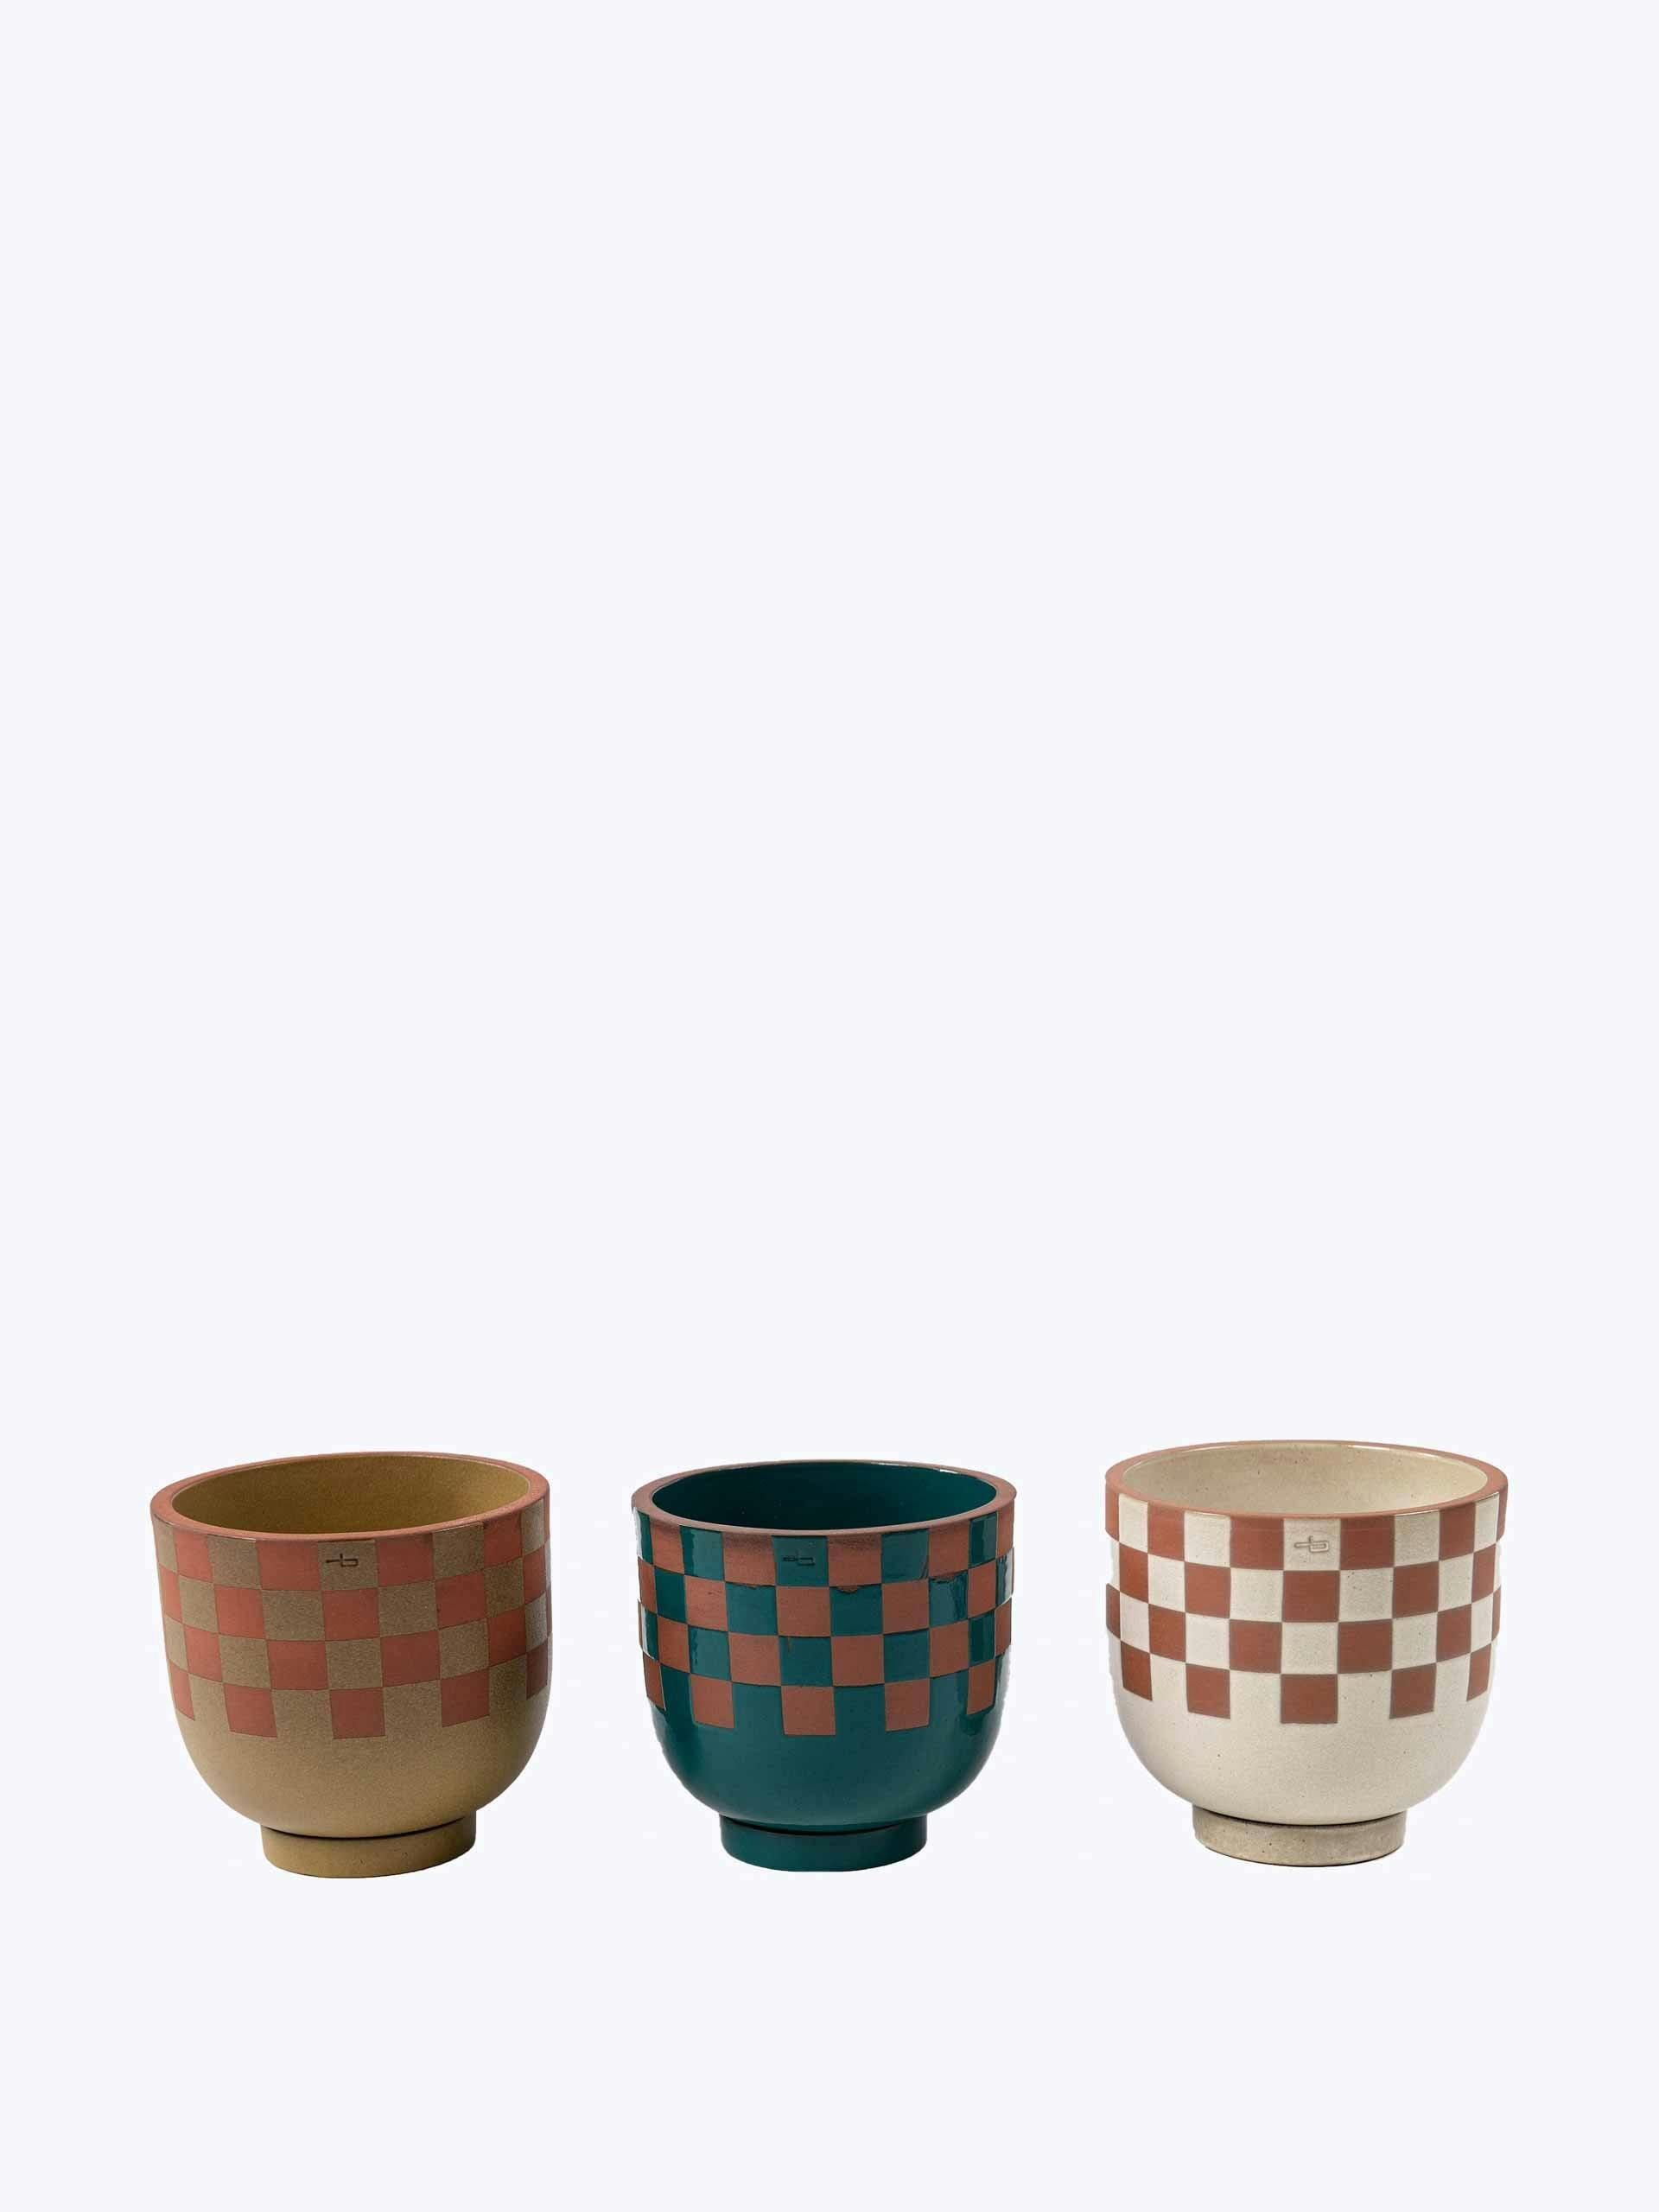 Terracotta and check pots